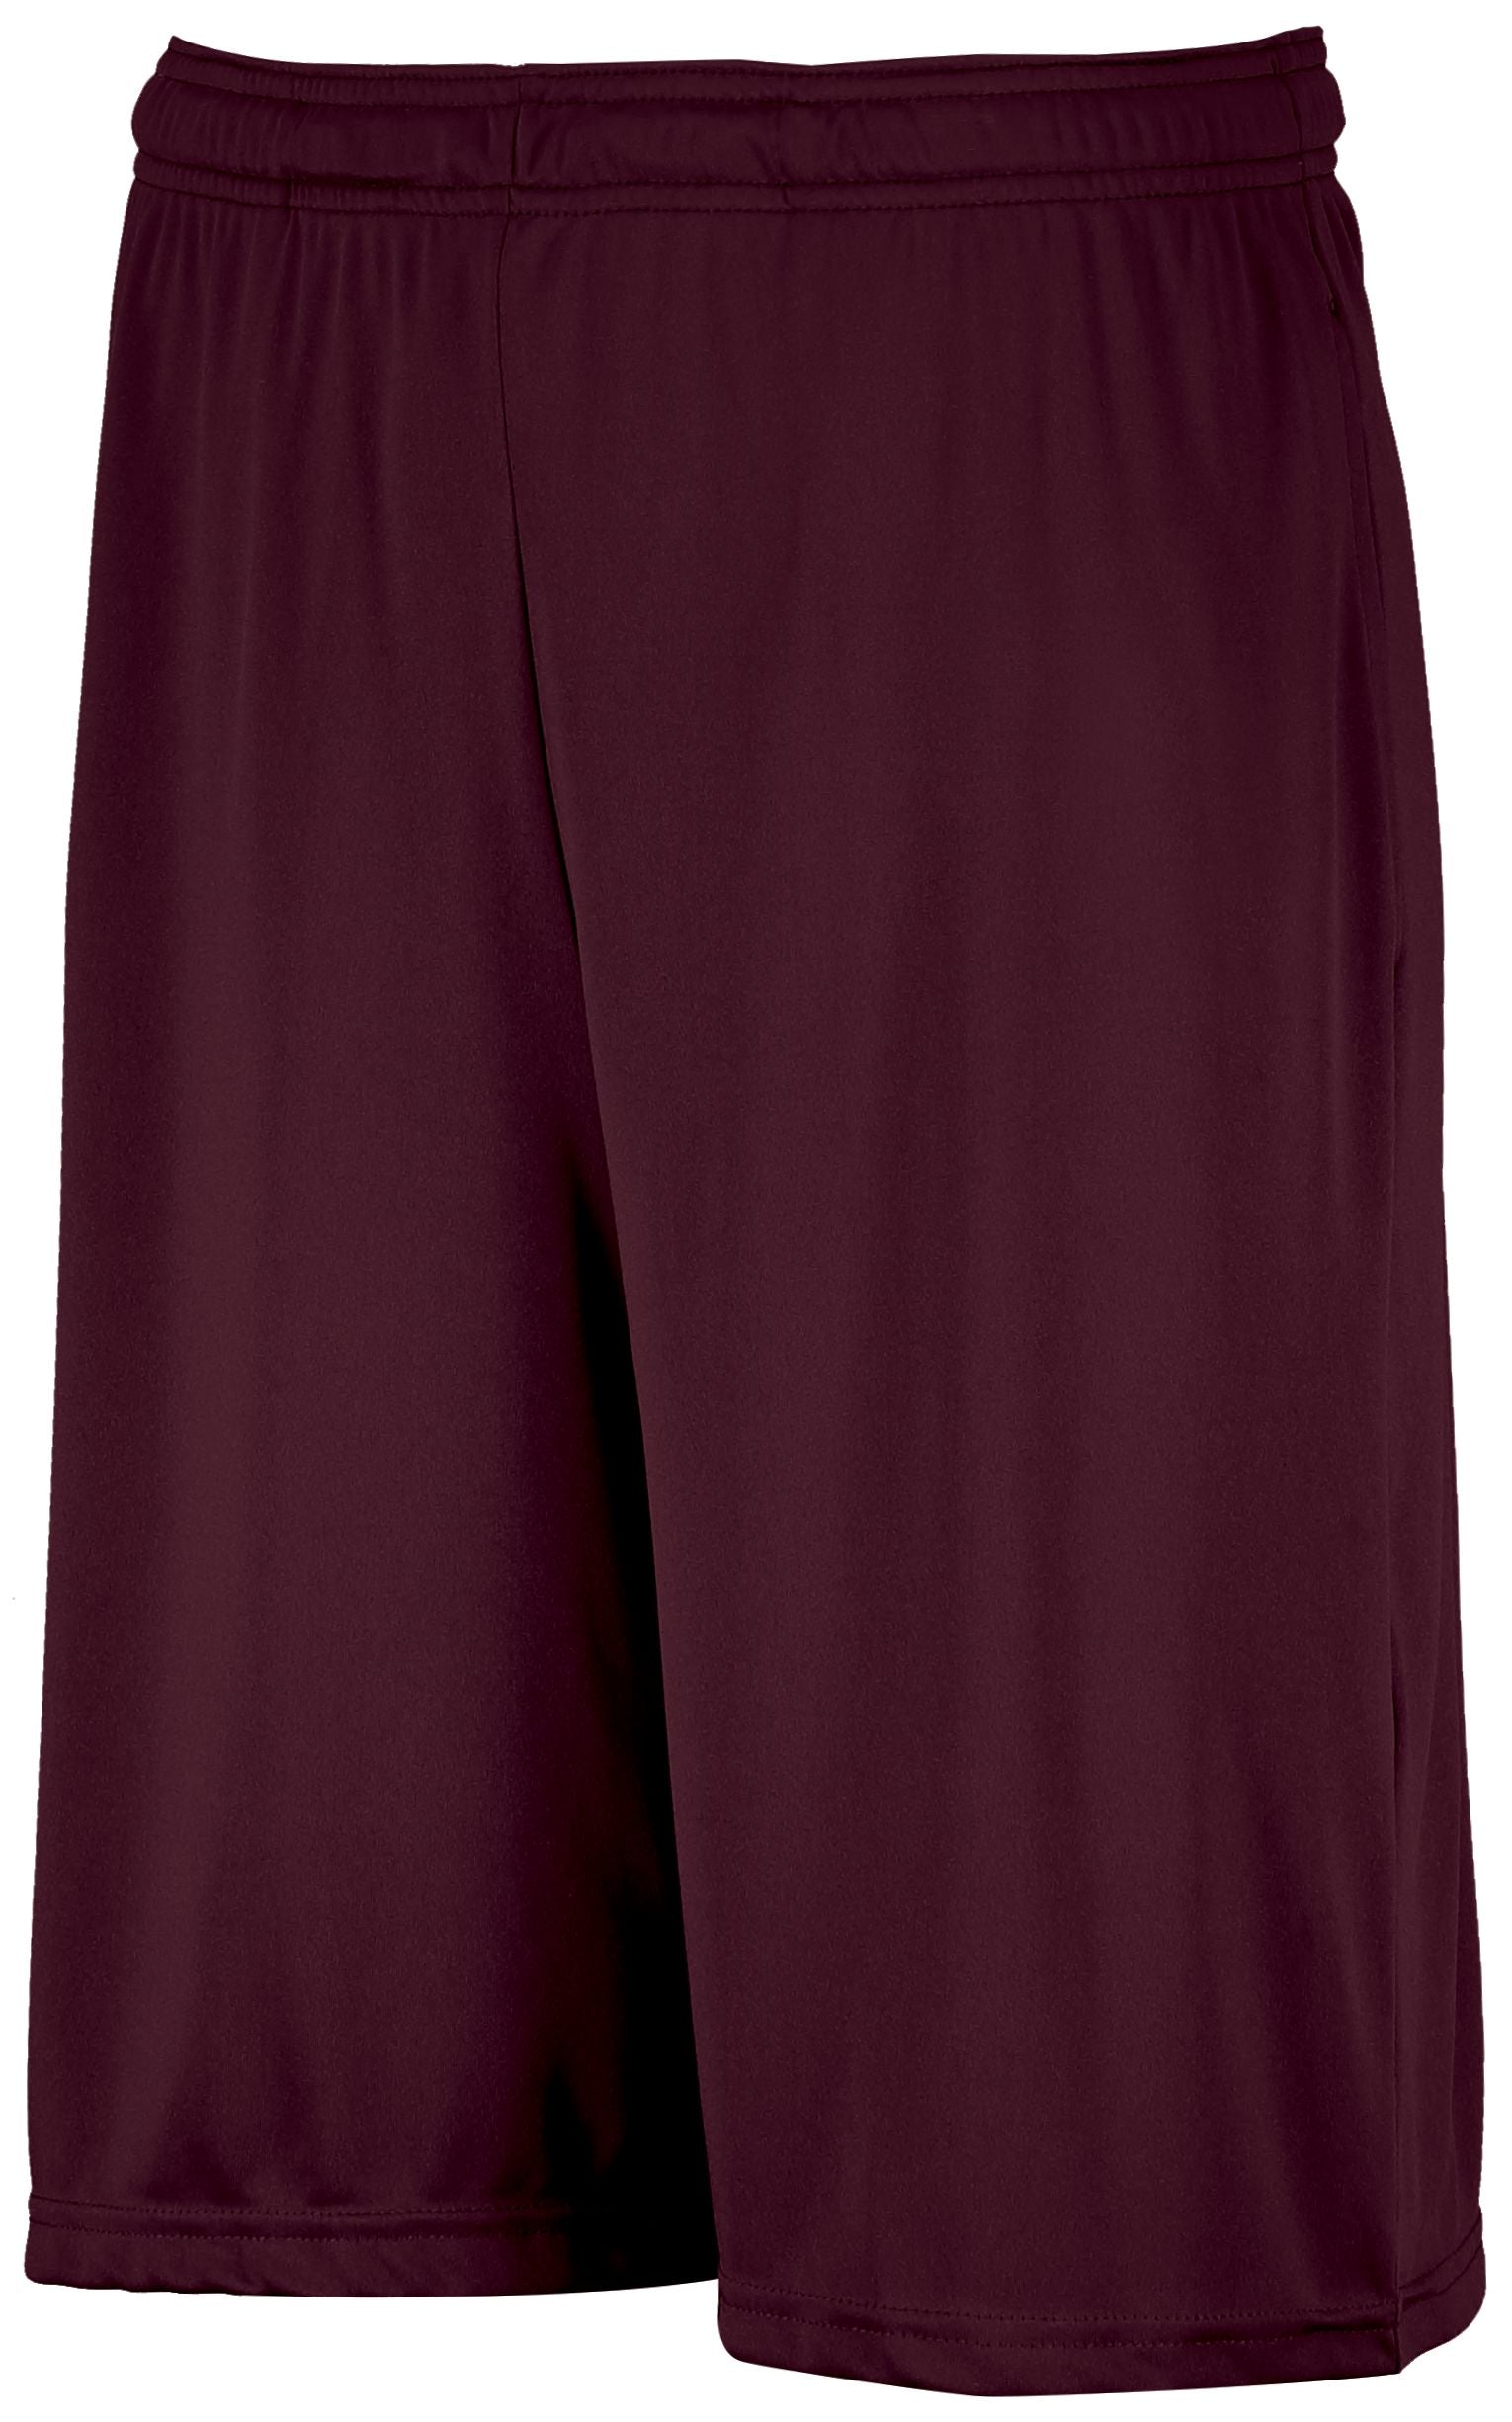 Russell Athletic Youth Dri-Power Essential Performance Shorts With Pockets in Maroon  -Part of the Youth, Youth-Shorts, Russell-Athletic-Products product lines at KanaleyCreations.com